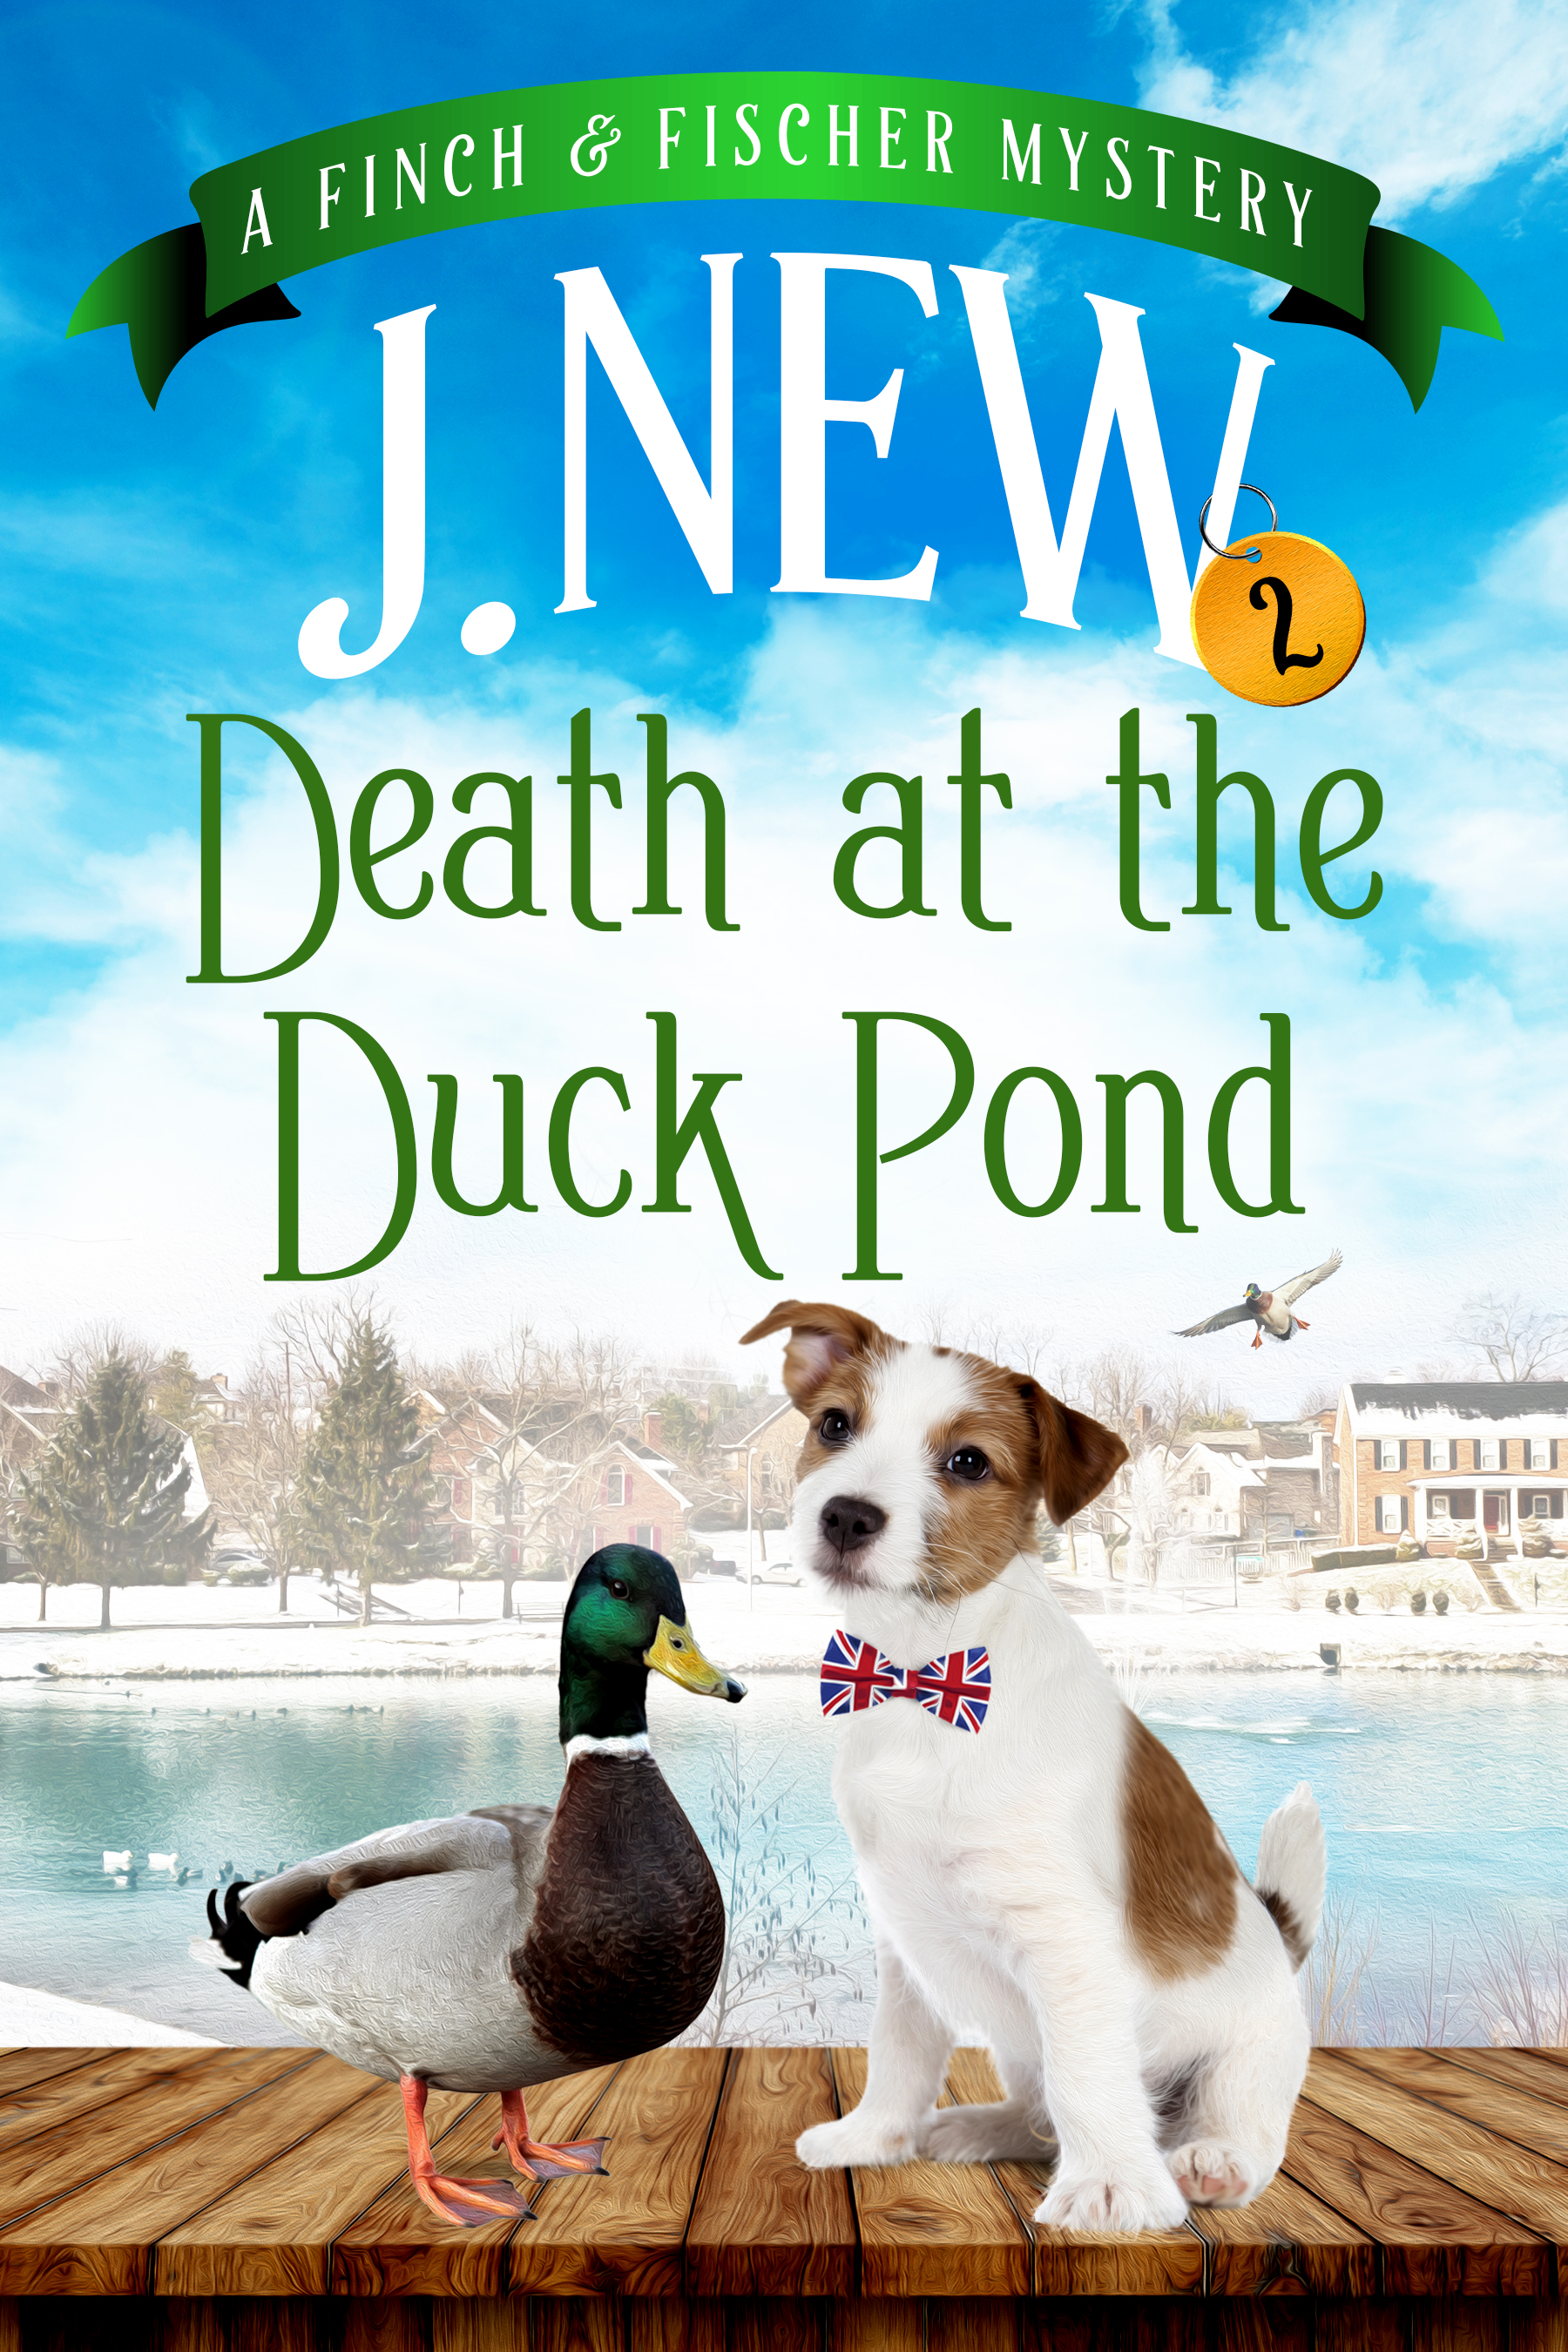 Death at the Duck Pond, the second book in the hugely popular British cozy mystery series by British author J. New